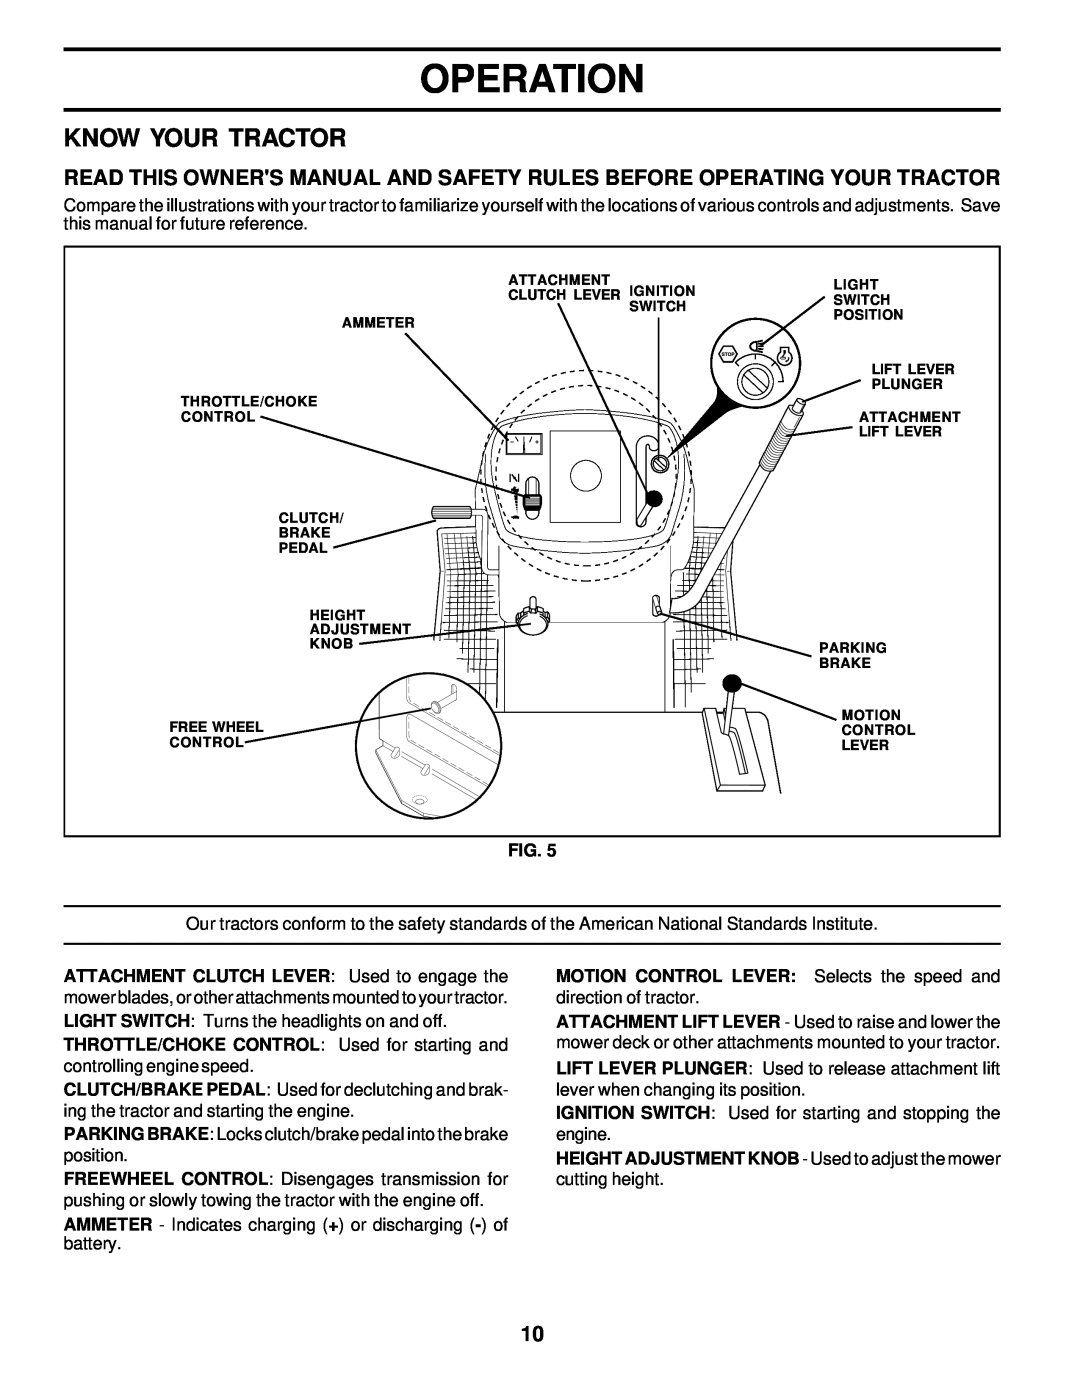 Poulan 178227 owner manual Know Your Tractor, Operation, MOTION CONTROL LEVER Selects the speed and direction of tractor 